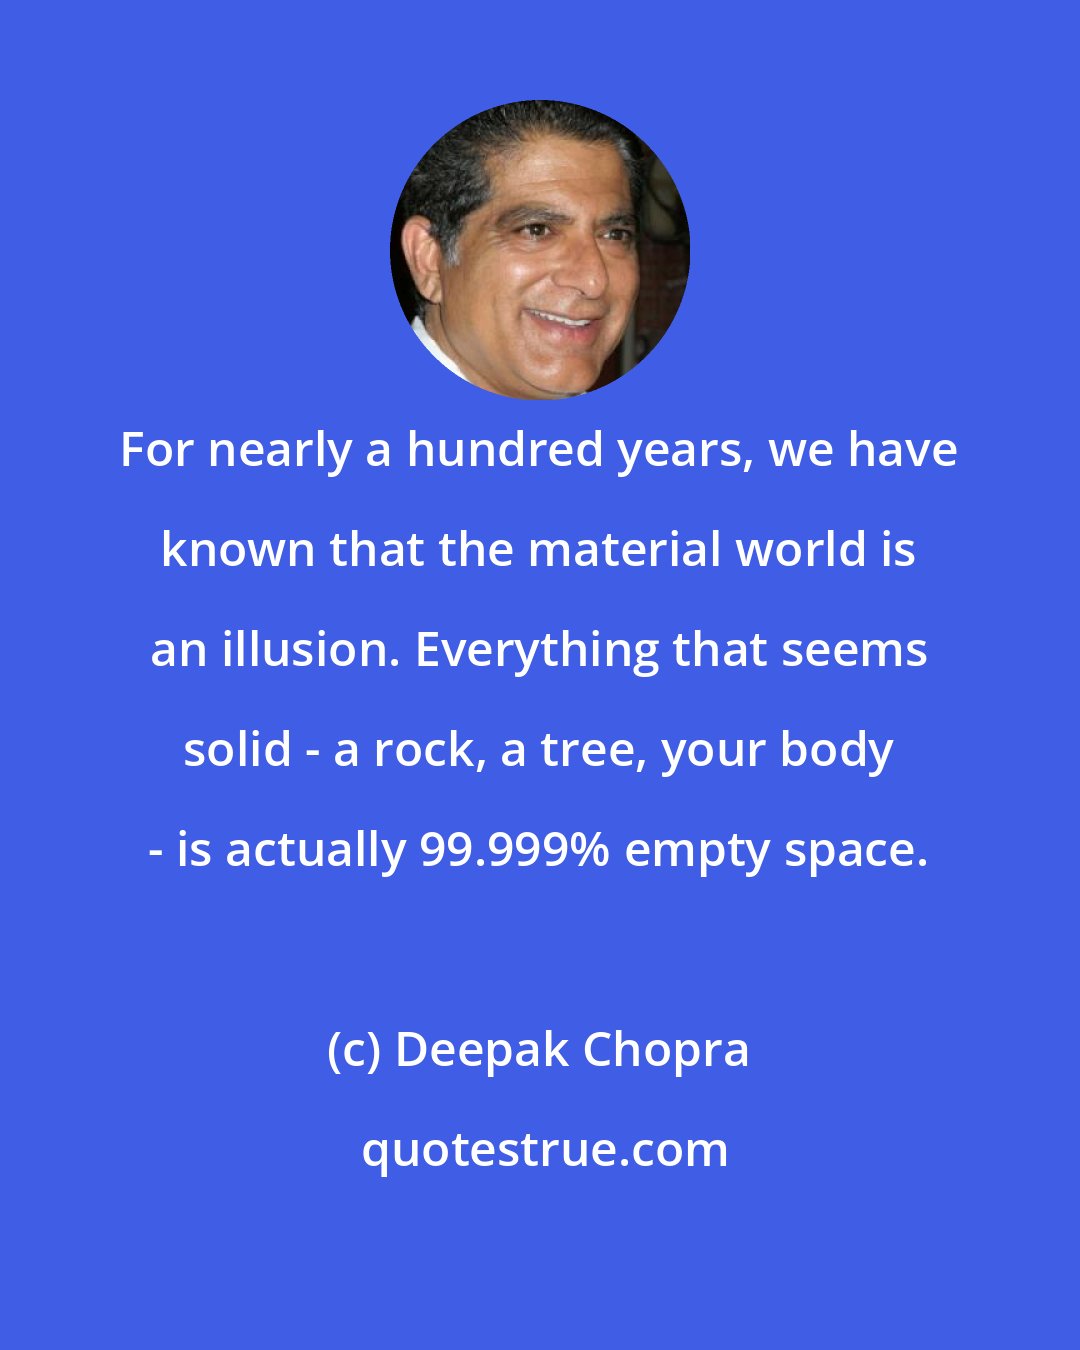 Deepak Chopra: For nearly a hundred years, we have known that the material world is an illusion. Everything that seems solid - a rock, a tree, your body - is actually 99.999% empty space.